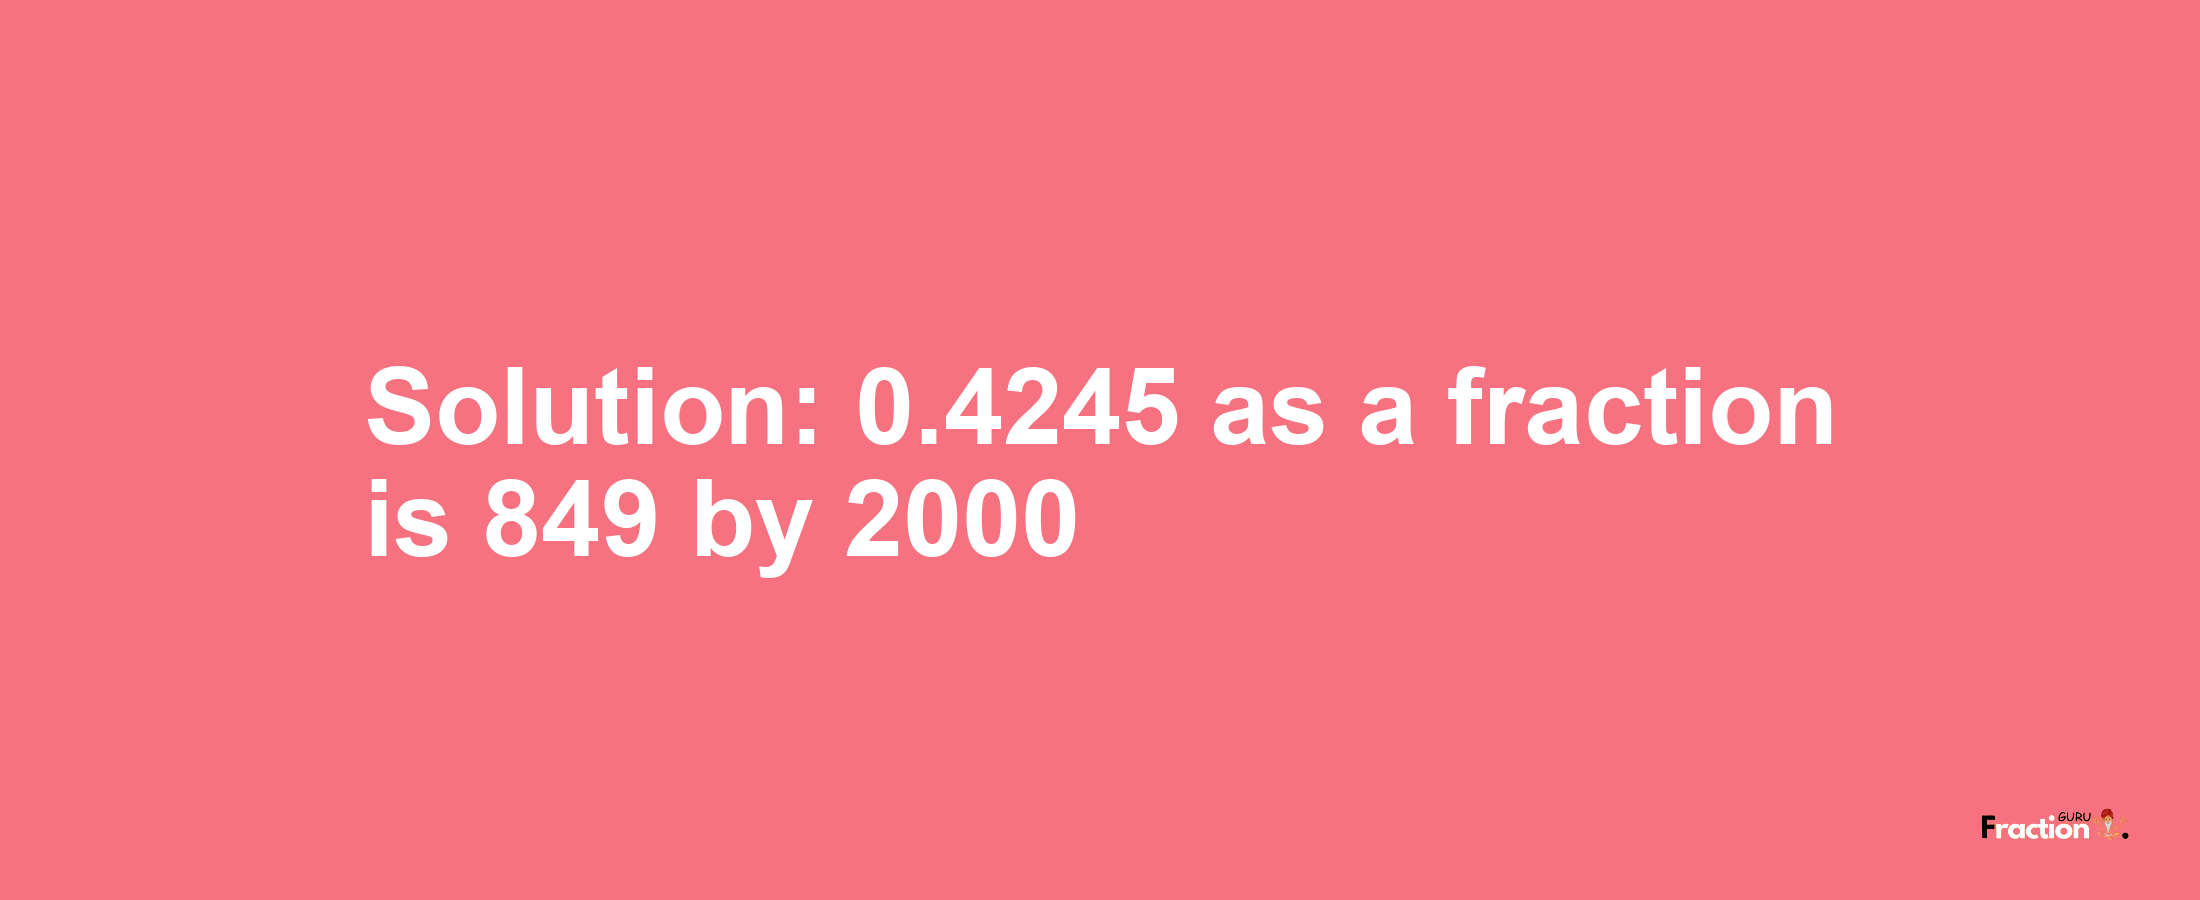 Solution:0.4245 as a fraction is 849/2000